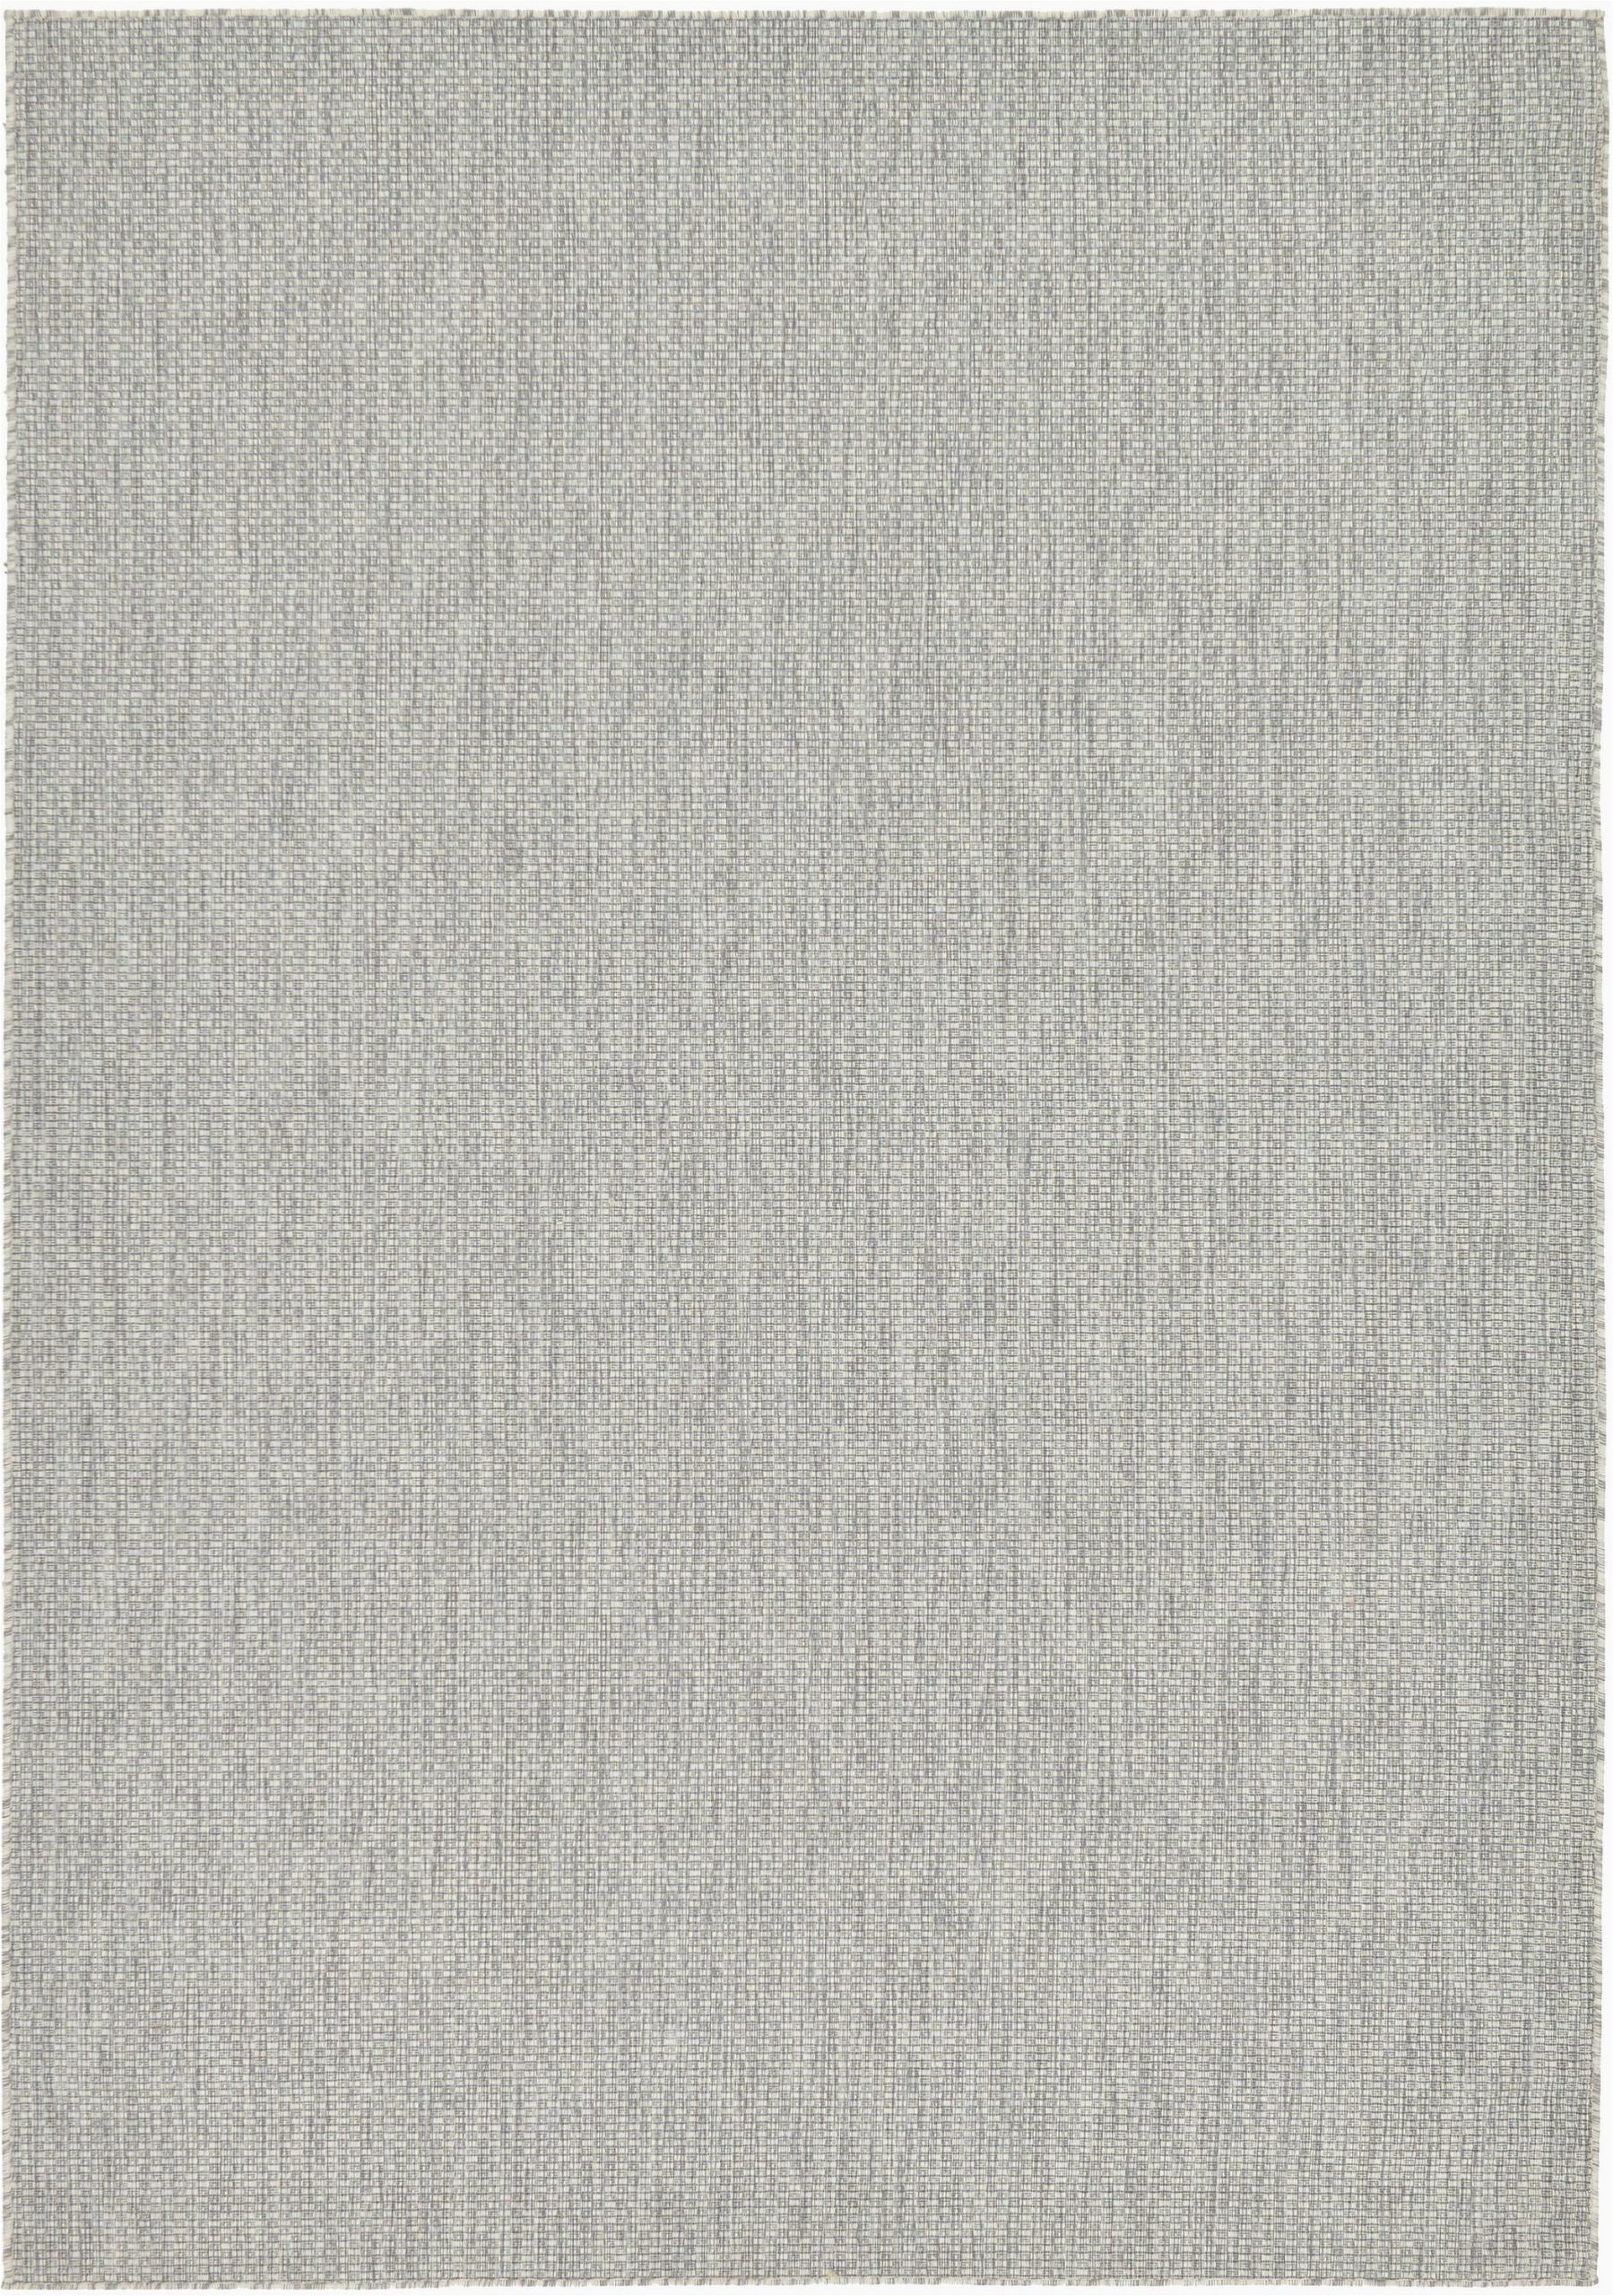 Solid Light Gray area Rug Light Gray 213cm X 305cm Outdoor solid Rug area Rugs